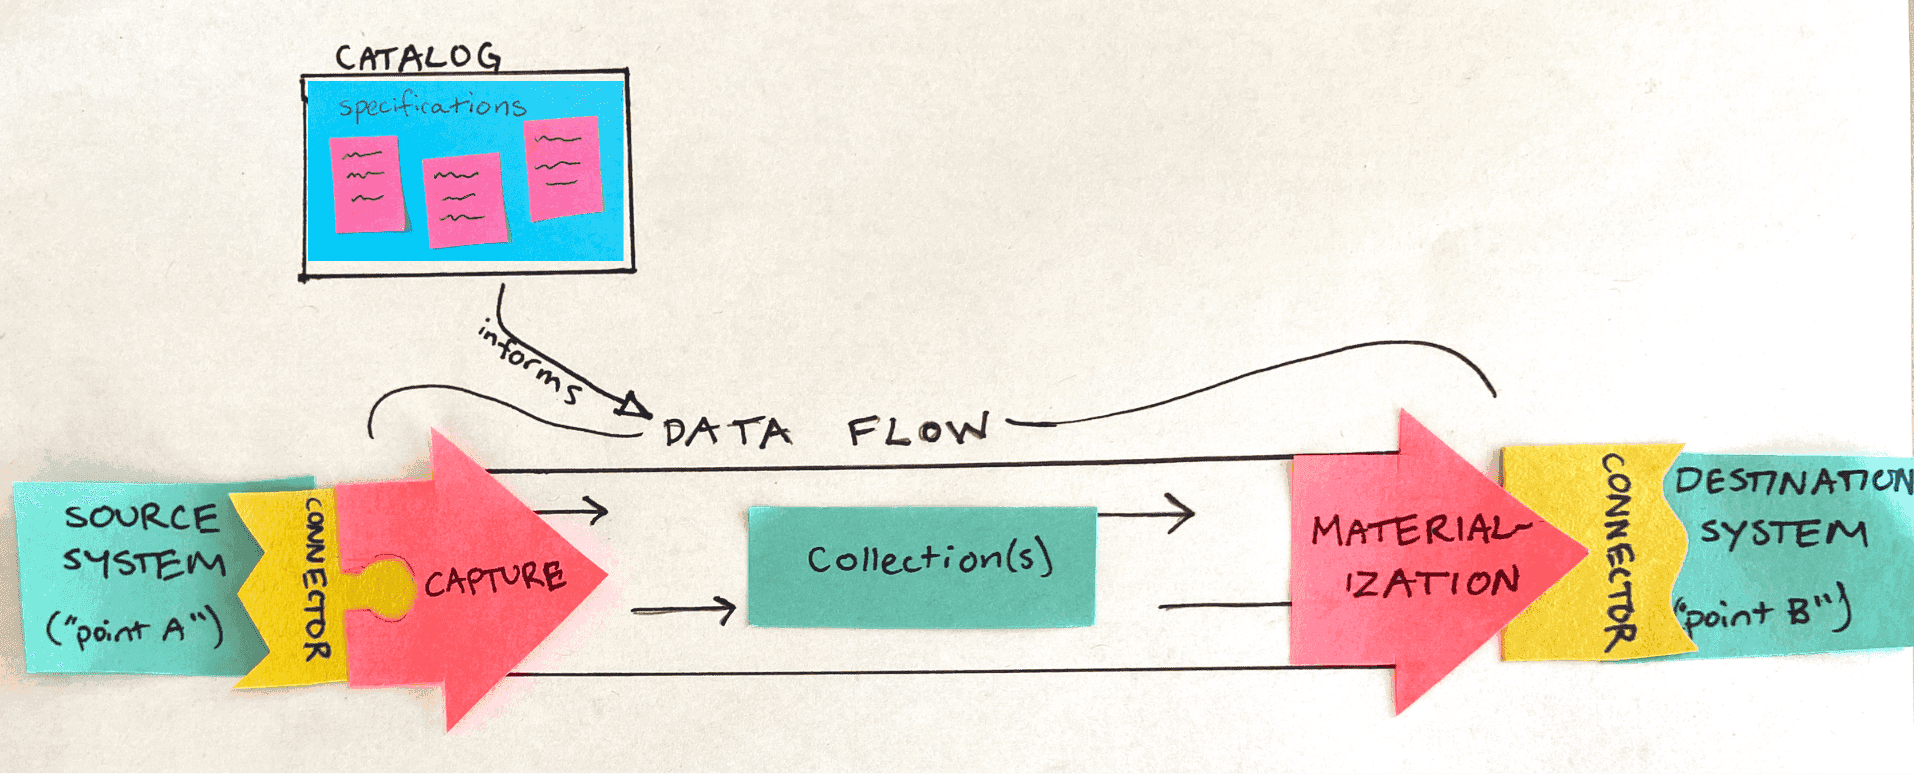 Everything you actually need to know to use Estuary Flow